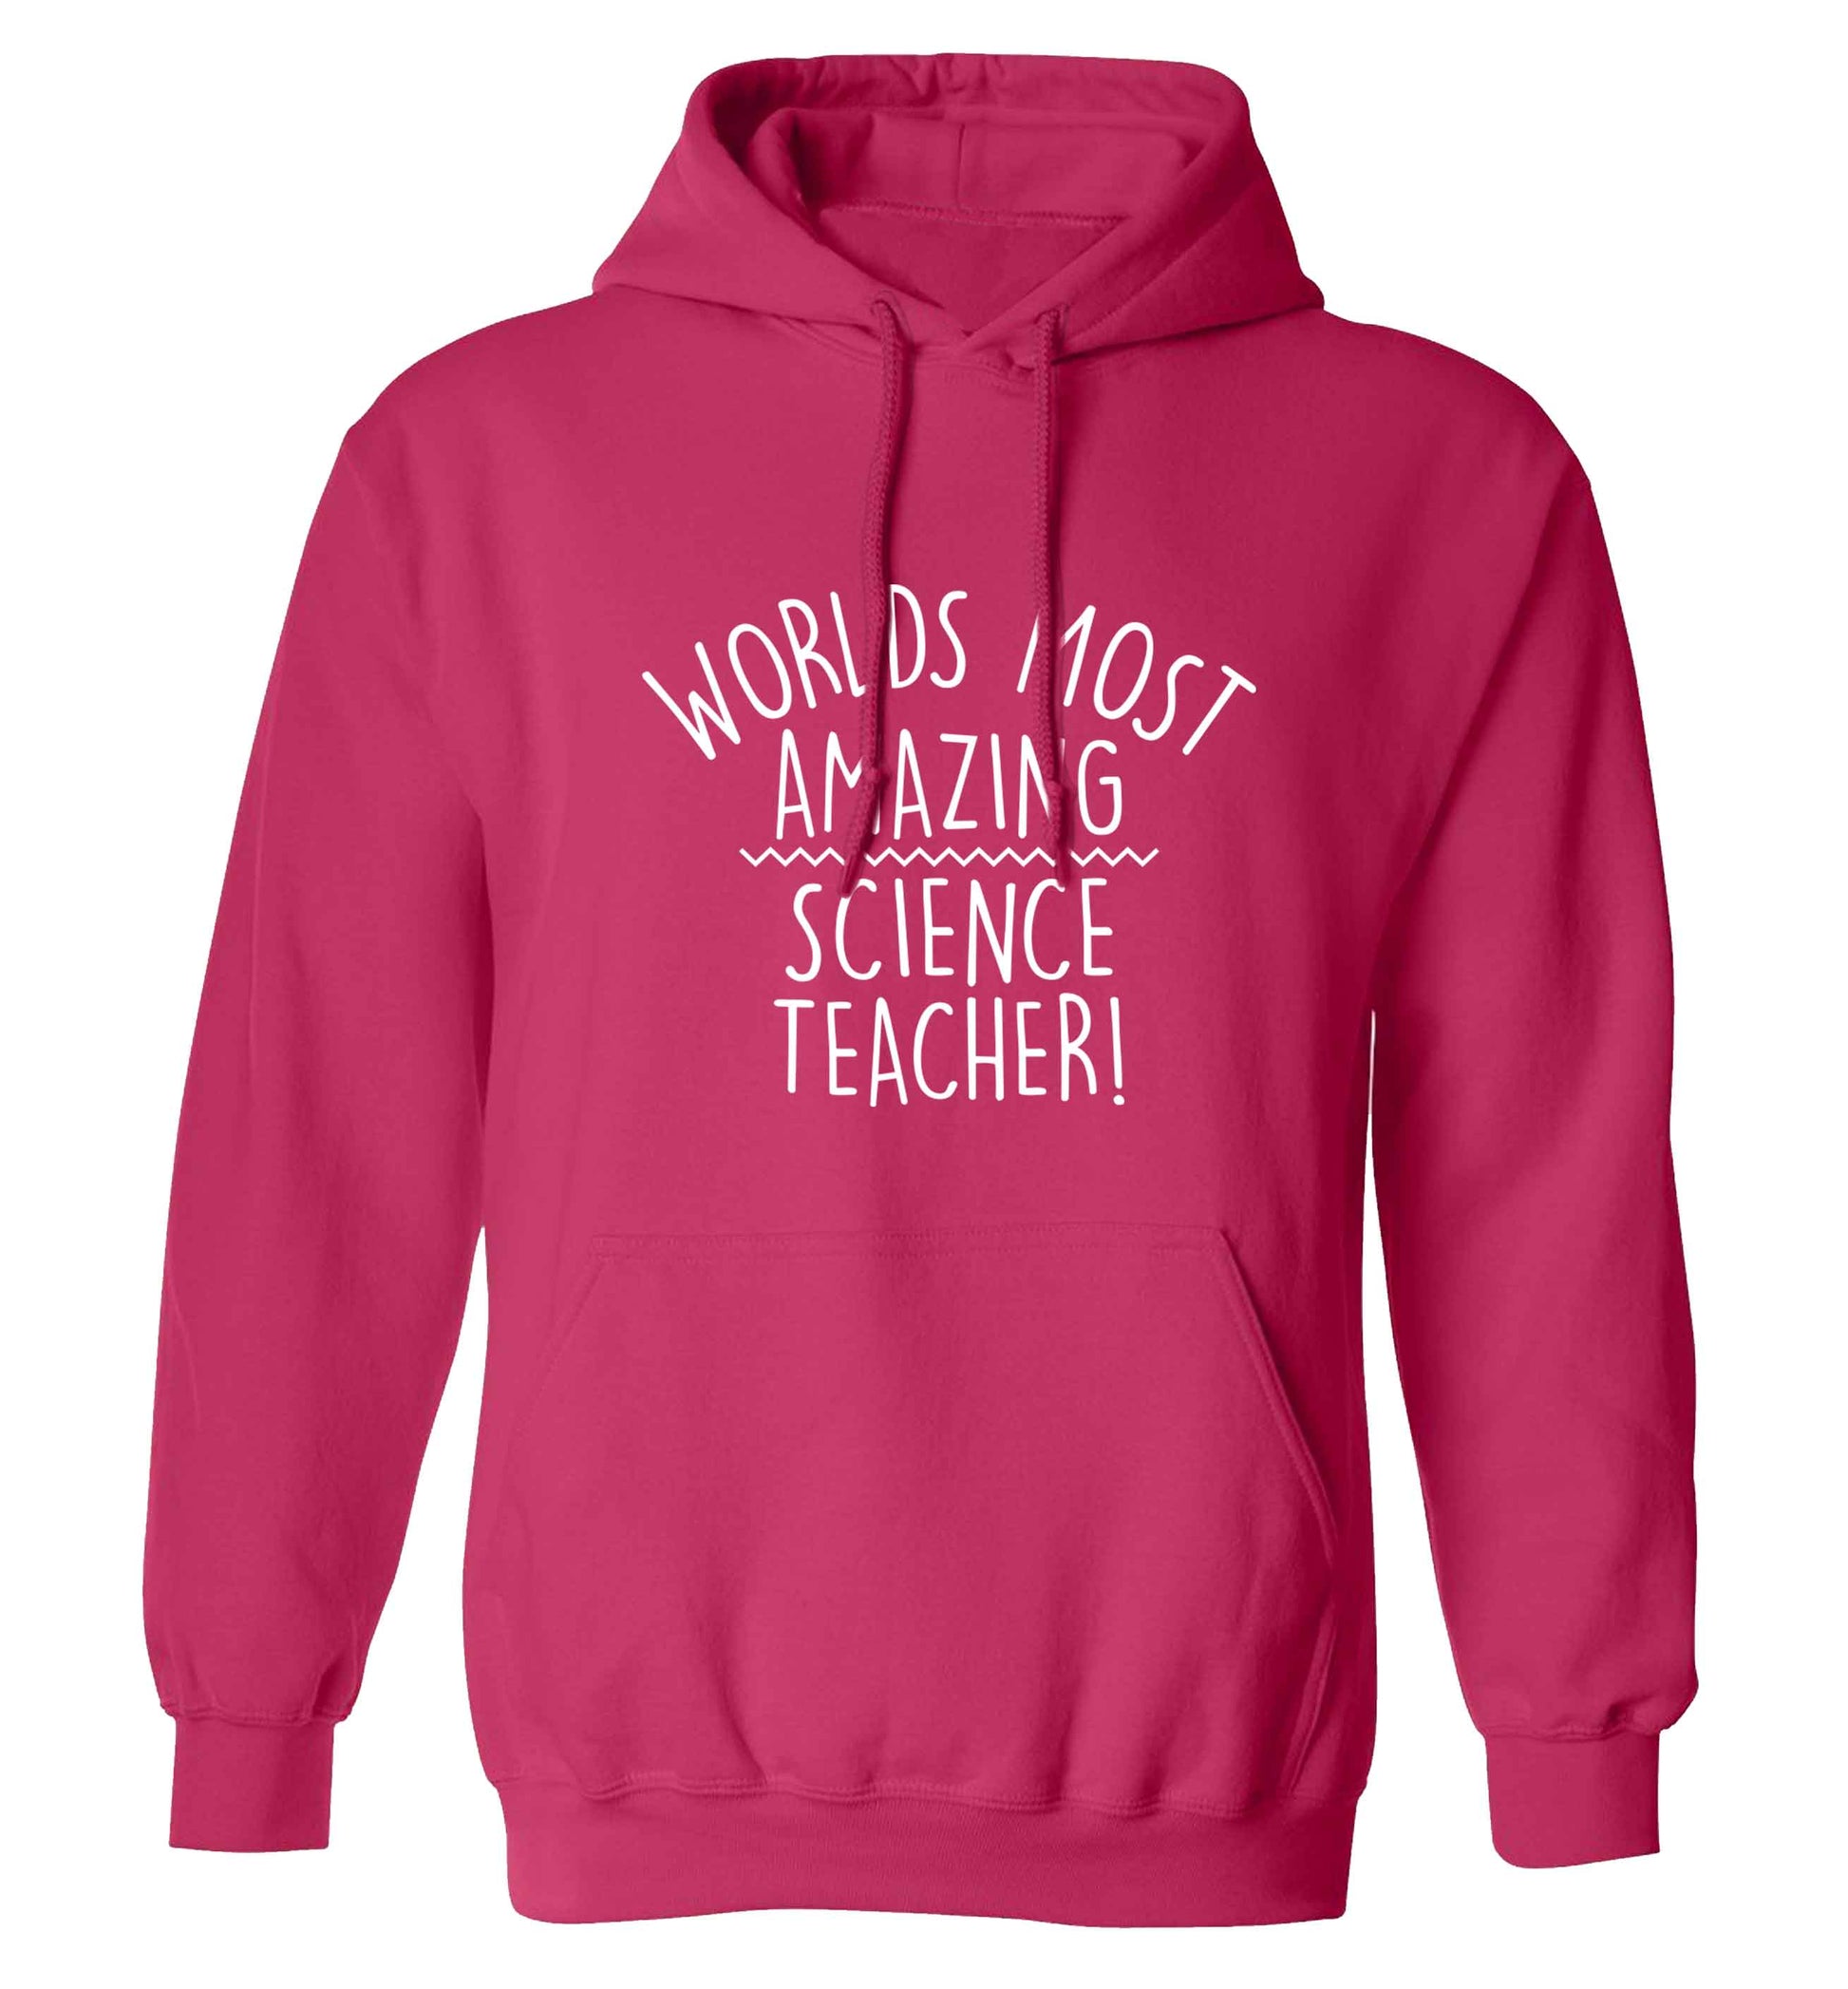 Worlds most amazing science teacher adults unisex pink hoodie 2XL